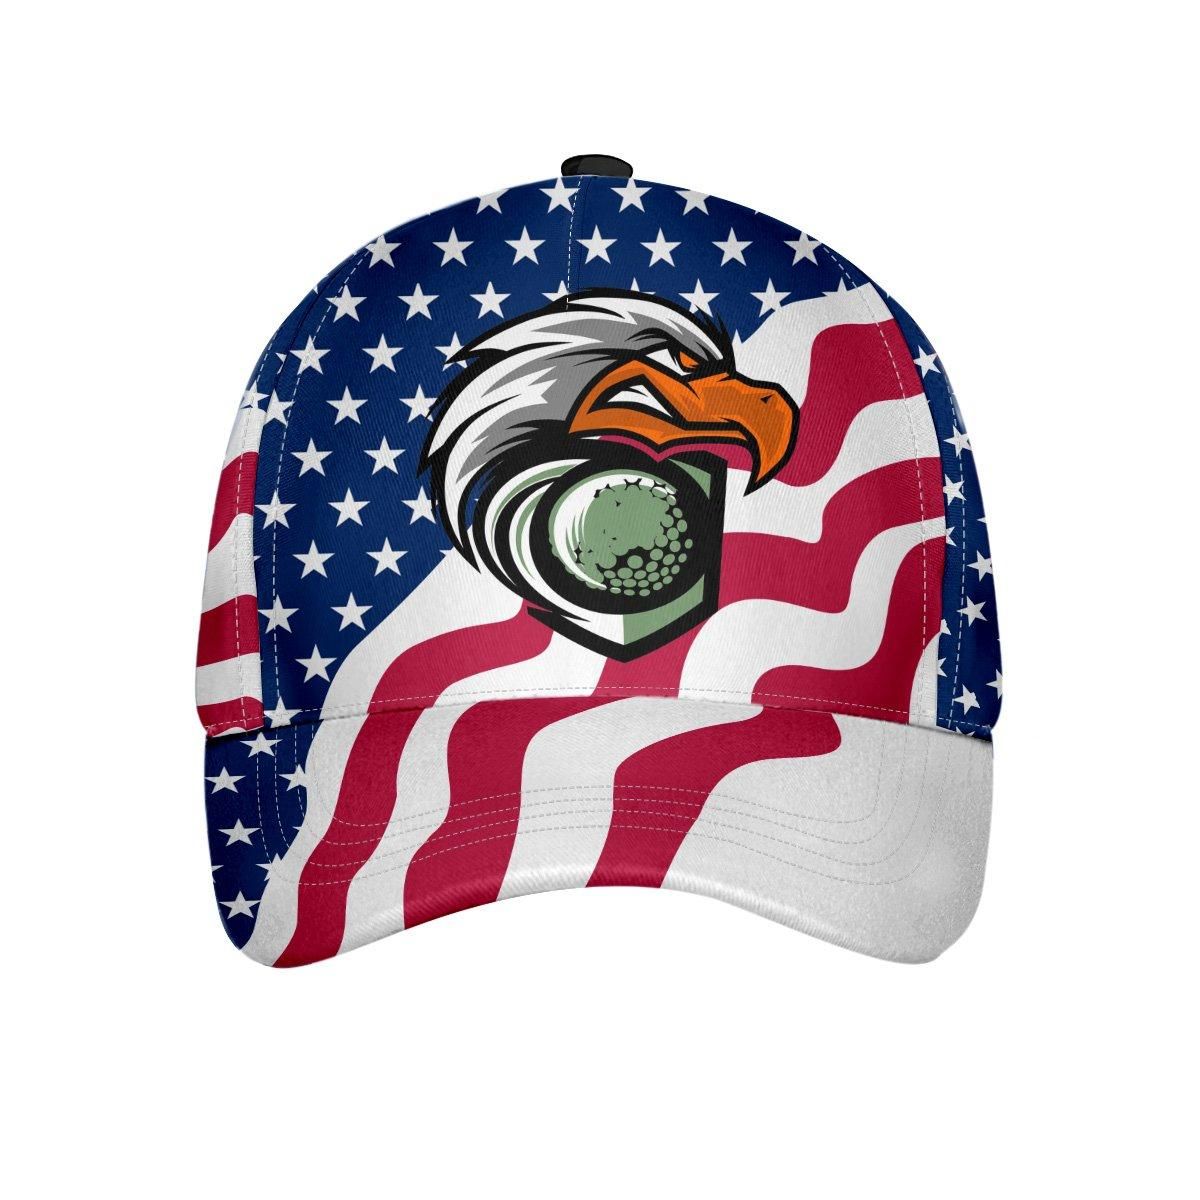 Putting For Eagle American Flag Cap